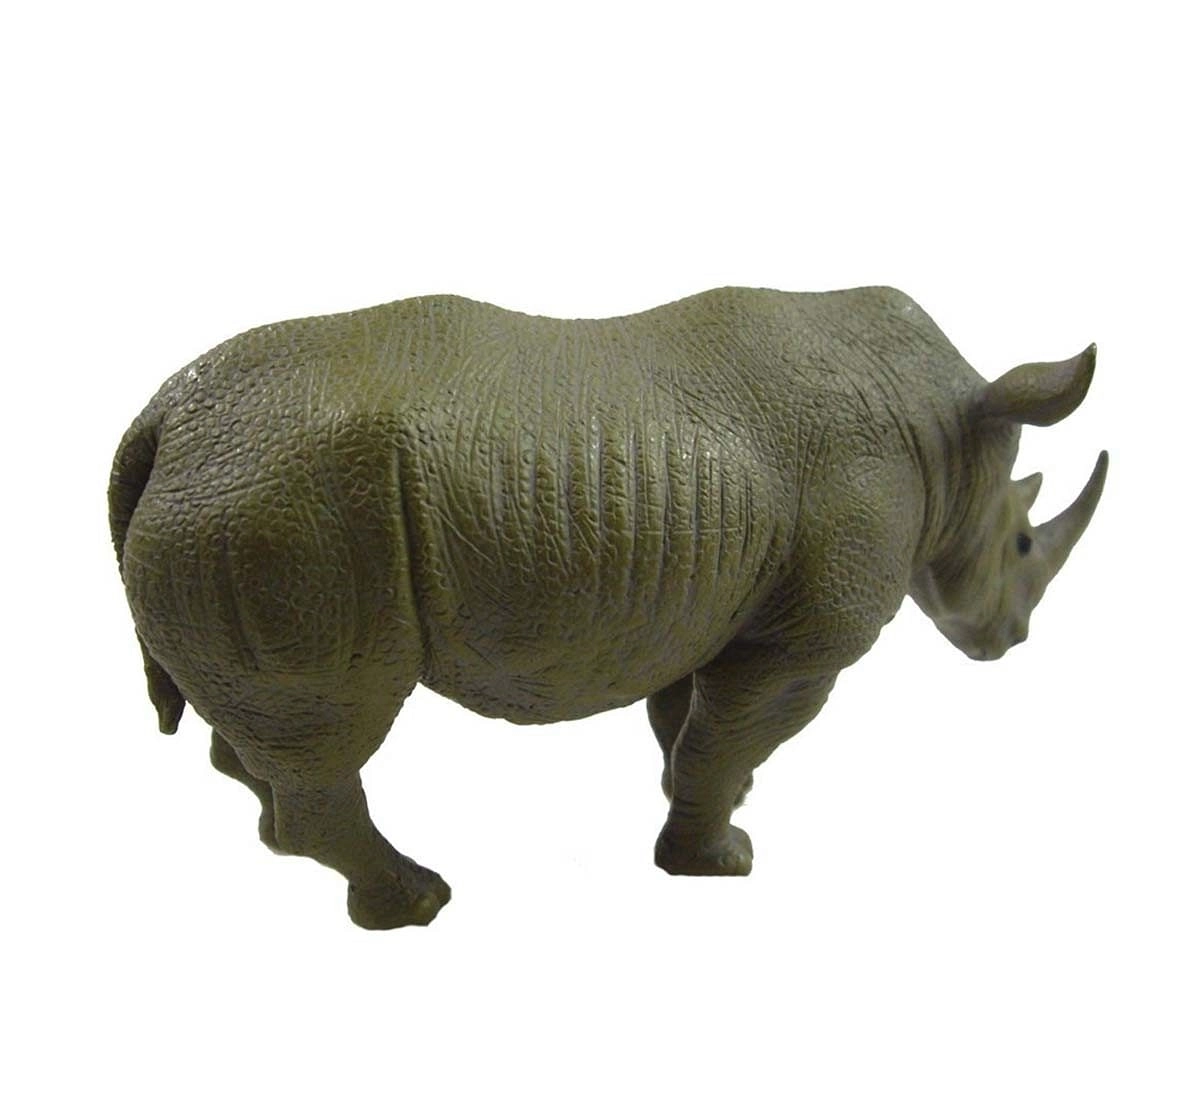 Collecta White Rhinoceros Animal Figures for Kids age 3Y+